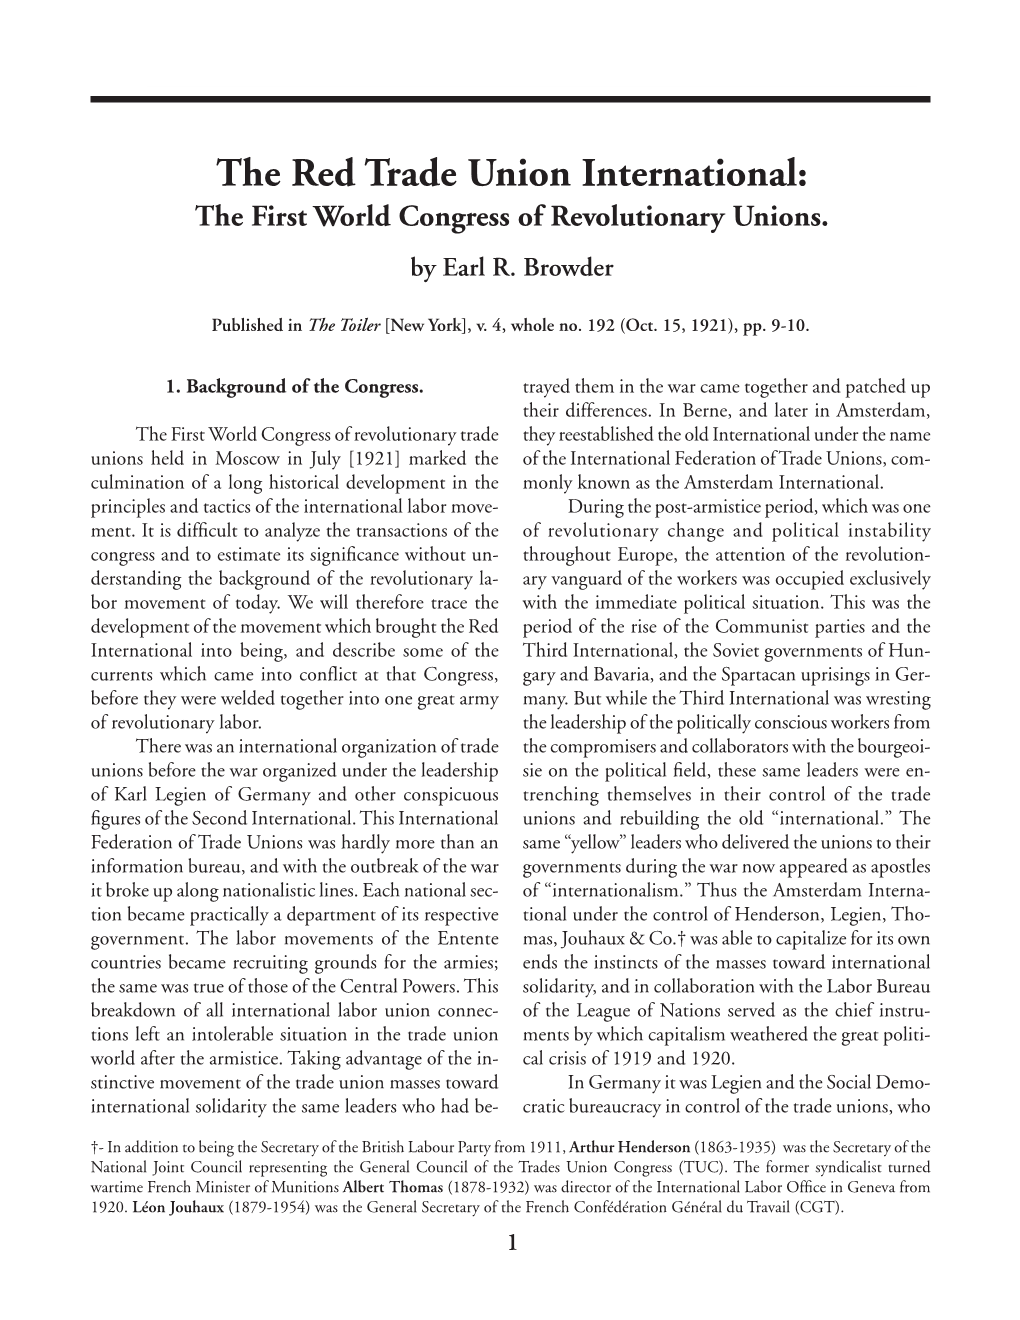 The Red Trade Union International: the First World Congress of Revolutionary Unions